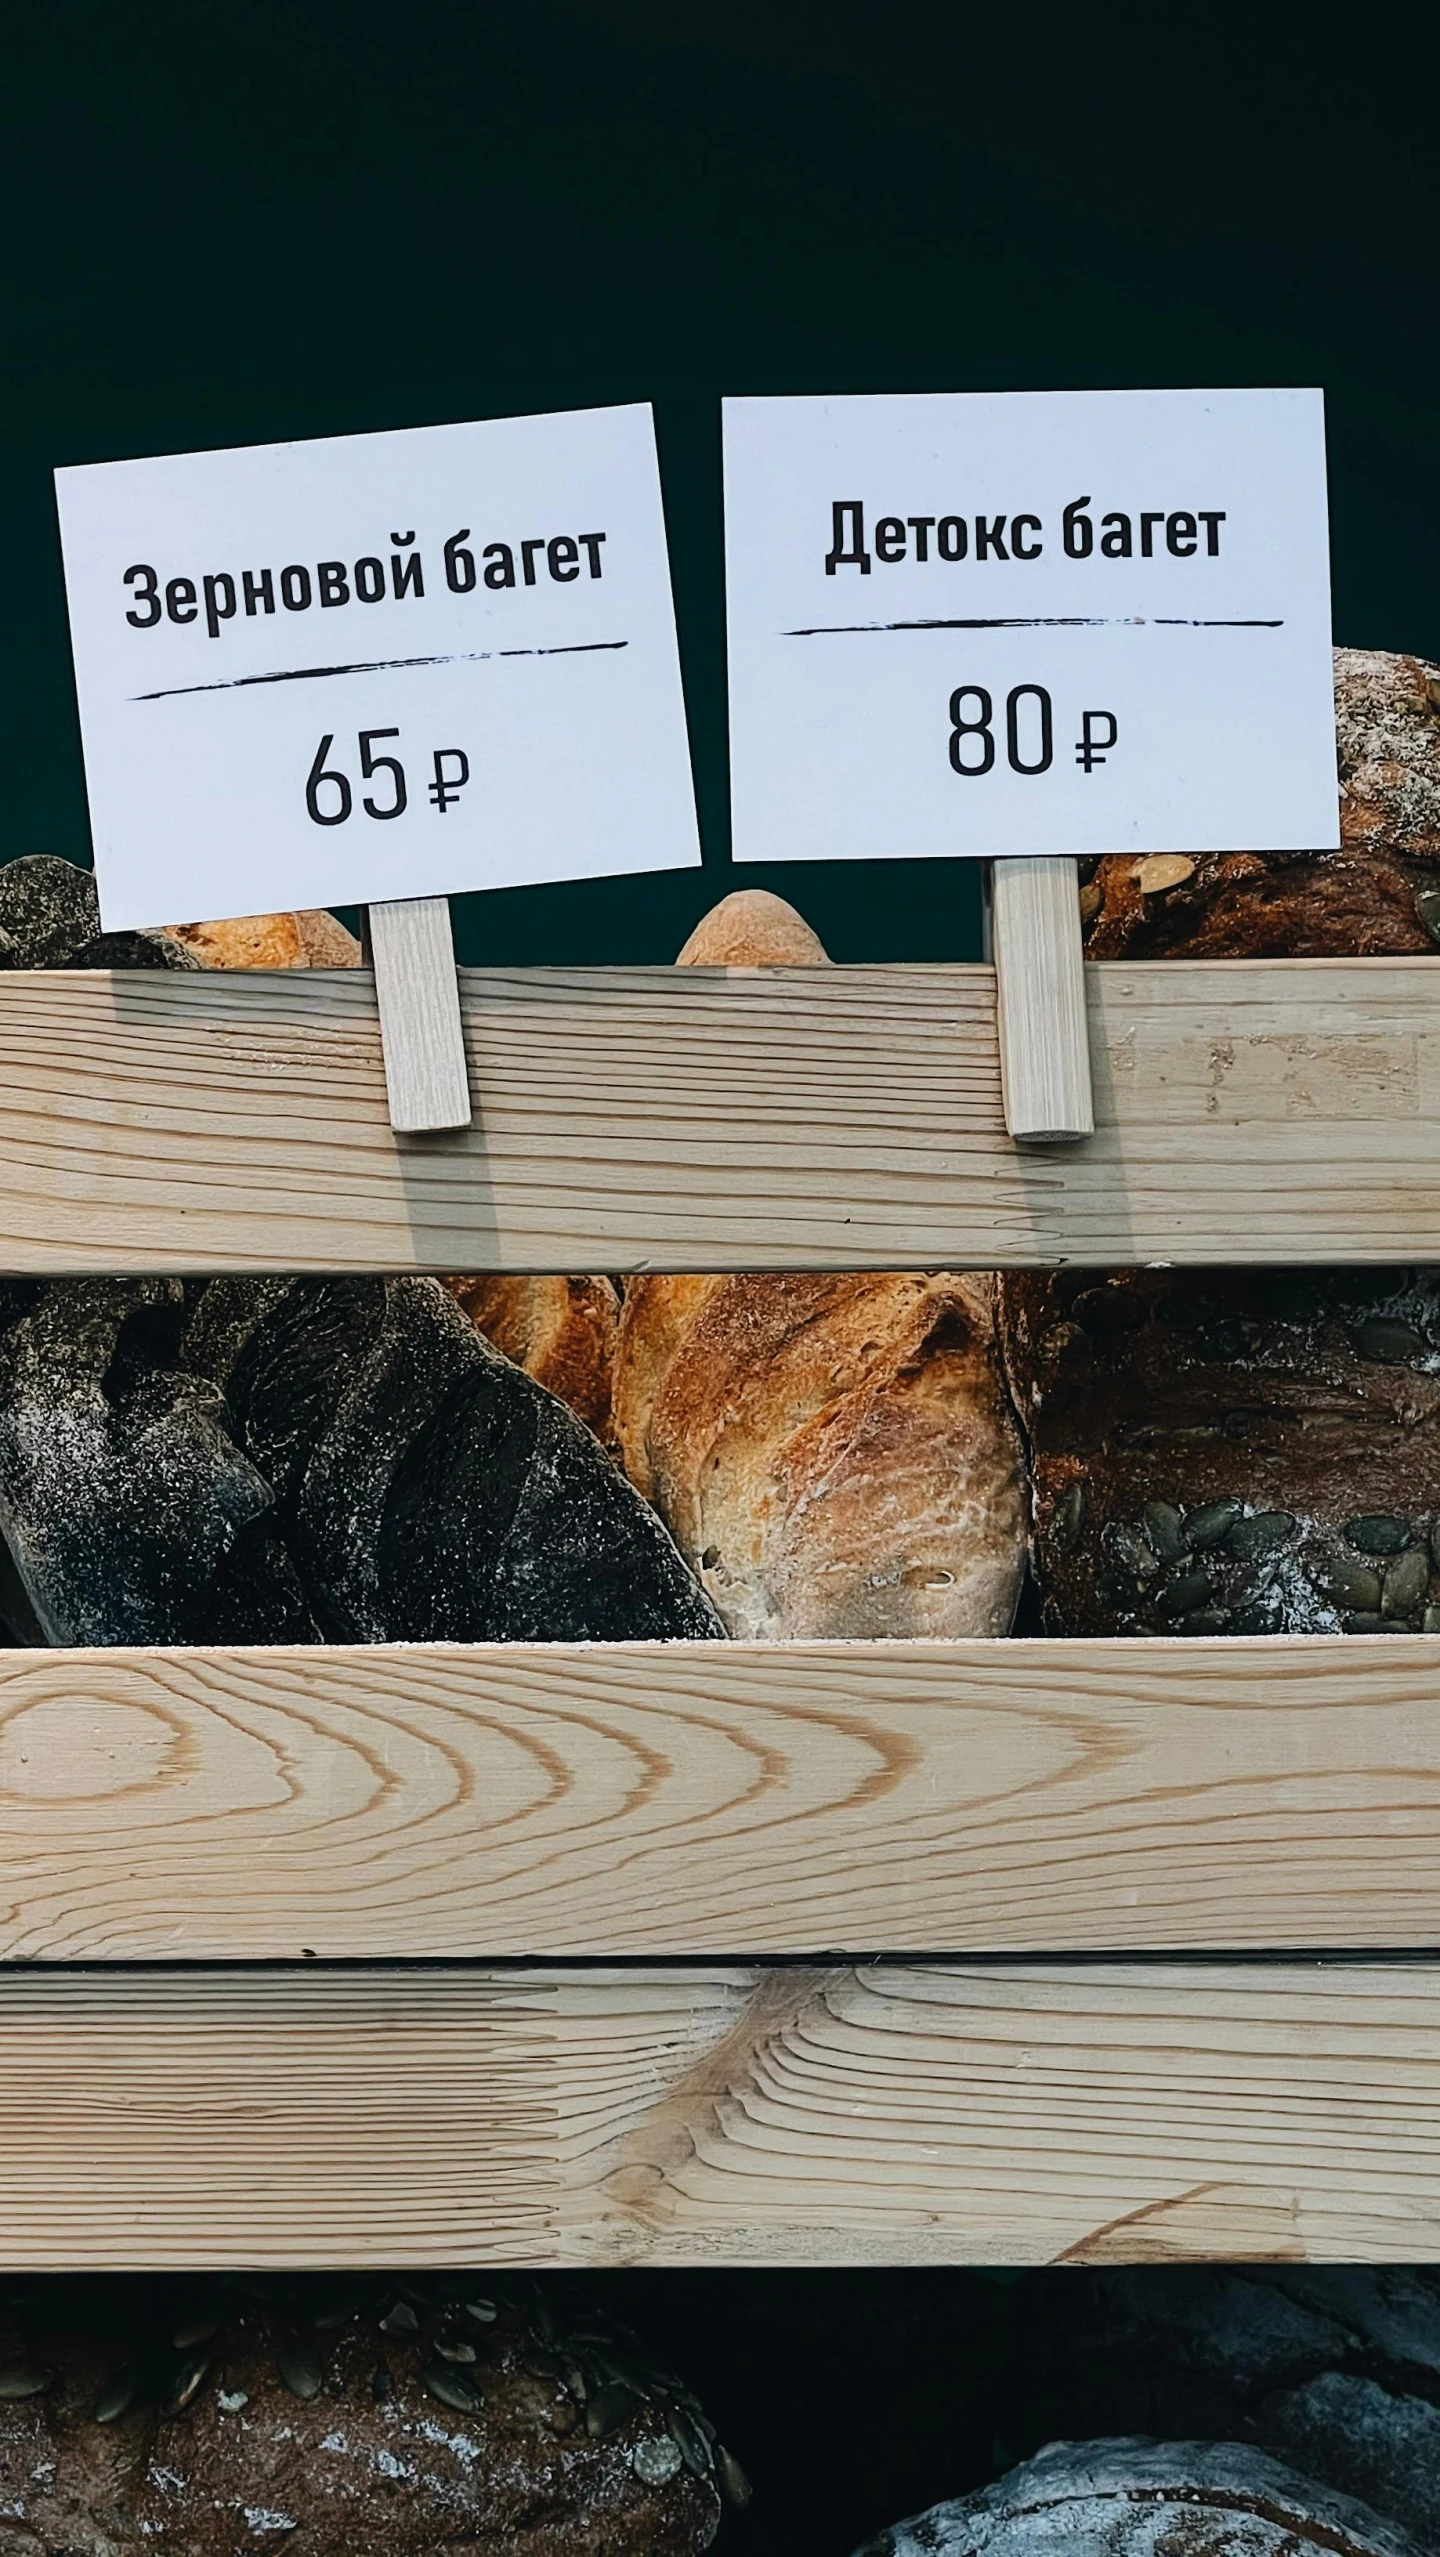 bread and croissants for sale on wooden crates